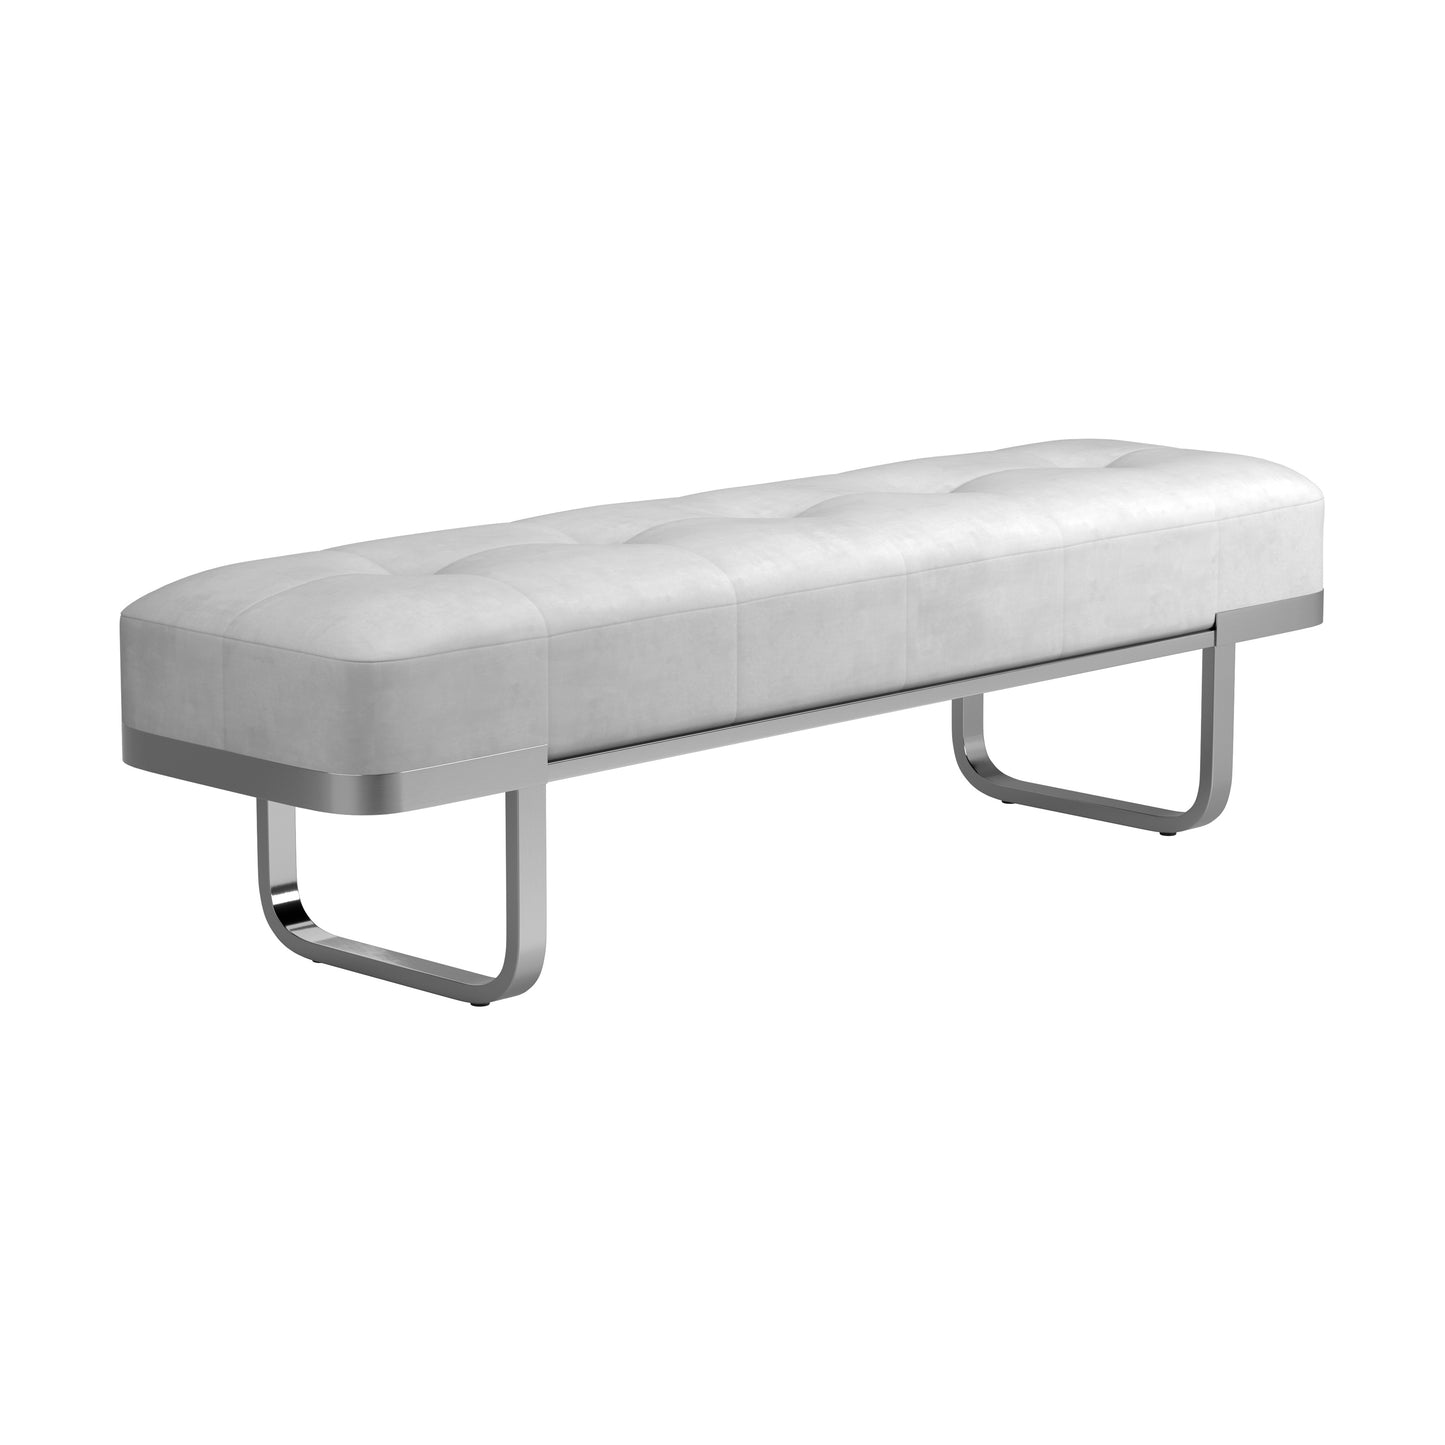 Tufted Upholstered Bench Off White and Chrome